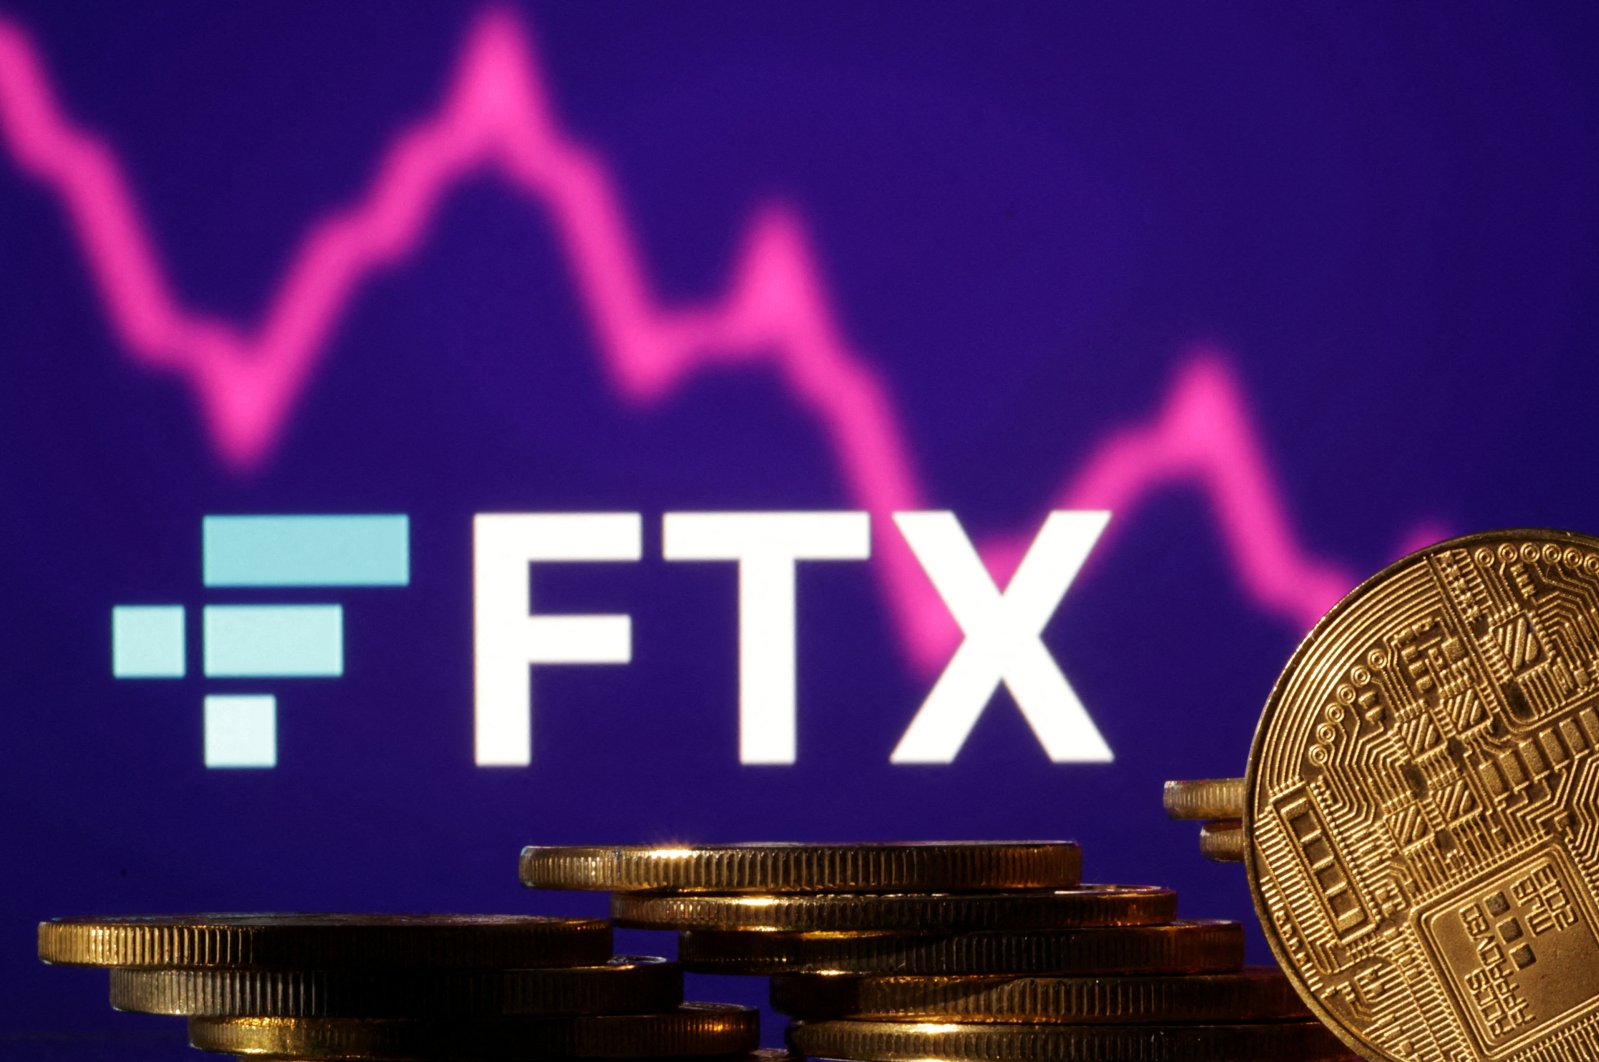 Representations of cryptocurrencies are seen in front of a displayed FTX logo and decreasing stock graph in this illustration taken on Nov. 10, 2022. (Reuters File Photo)